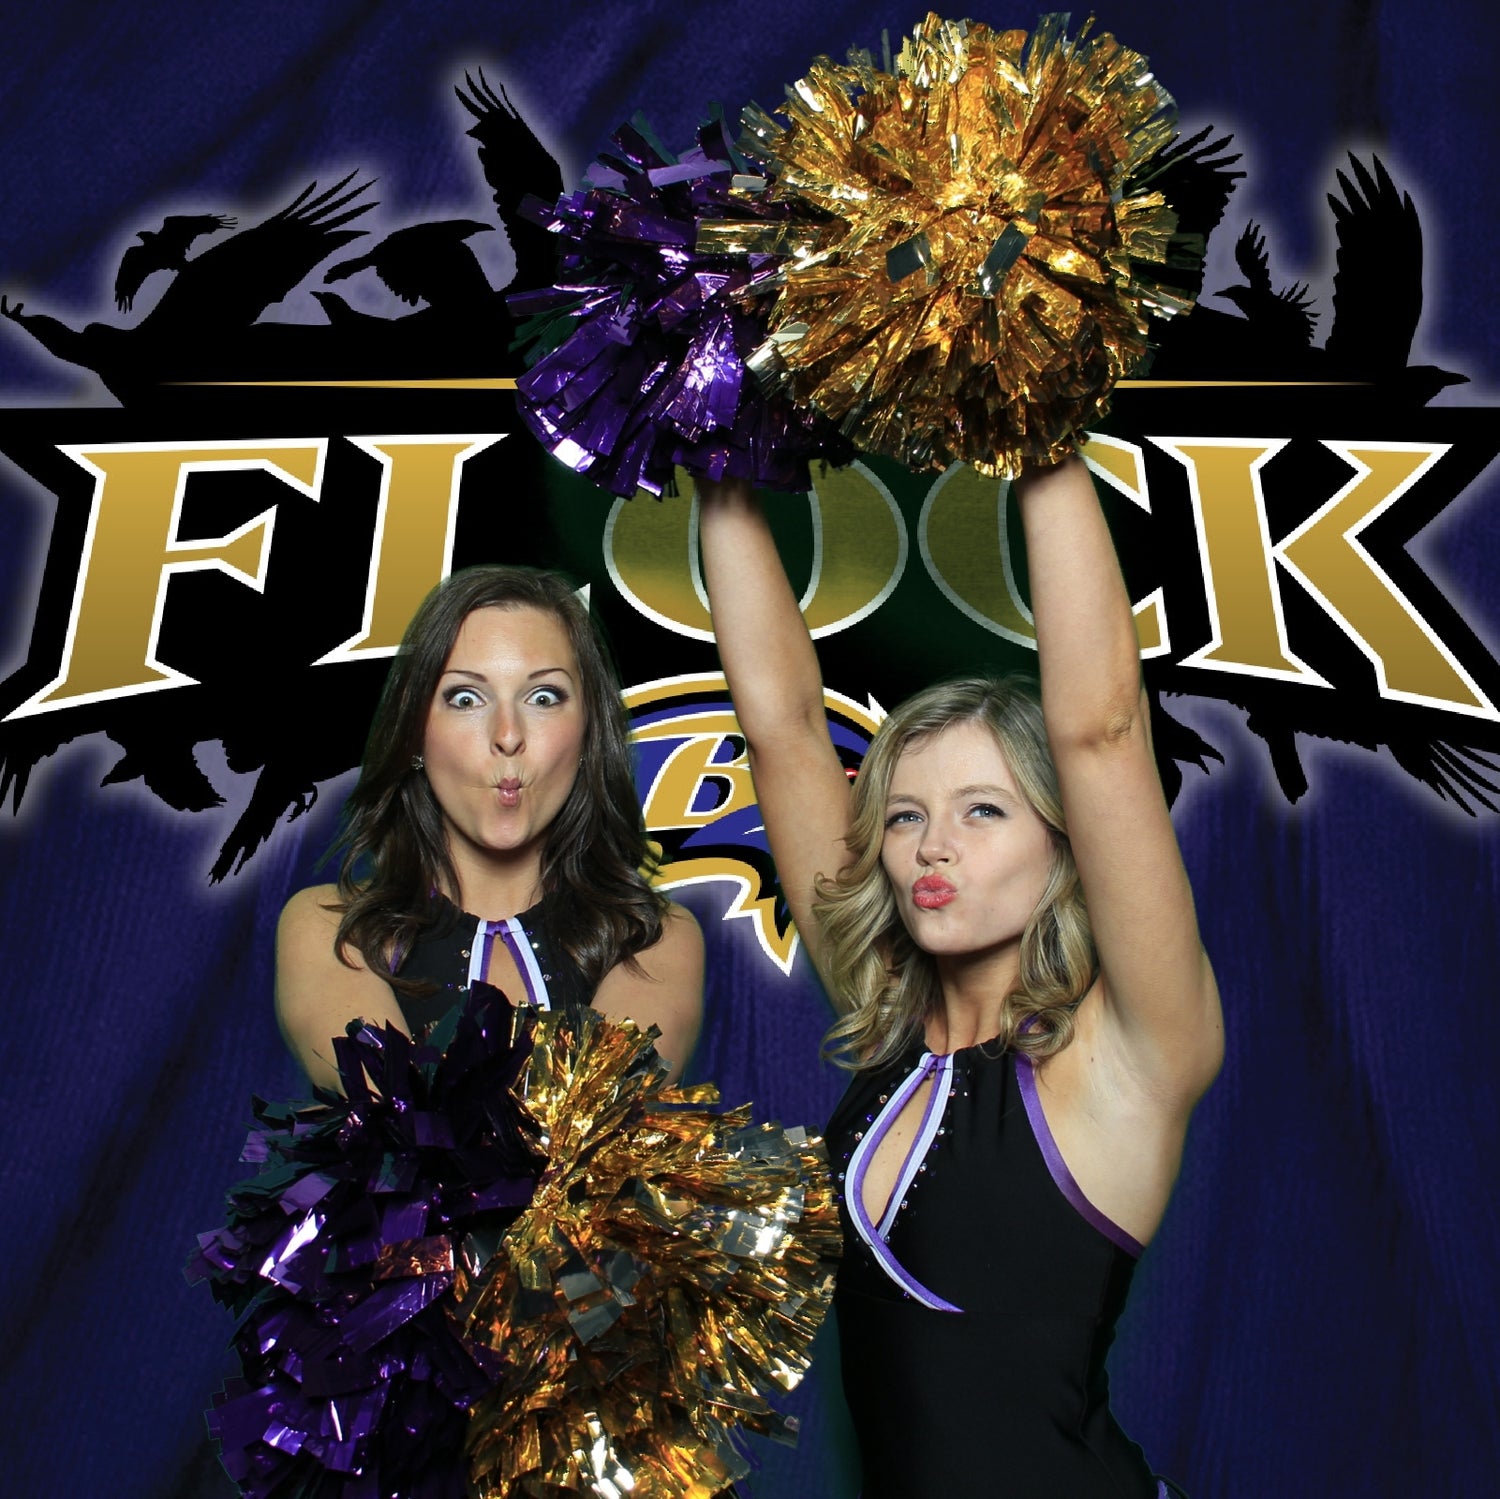 Green Screen Photo Booth Picture of Baltimore Ravens Cheerleaders